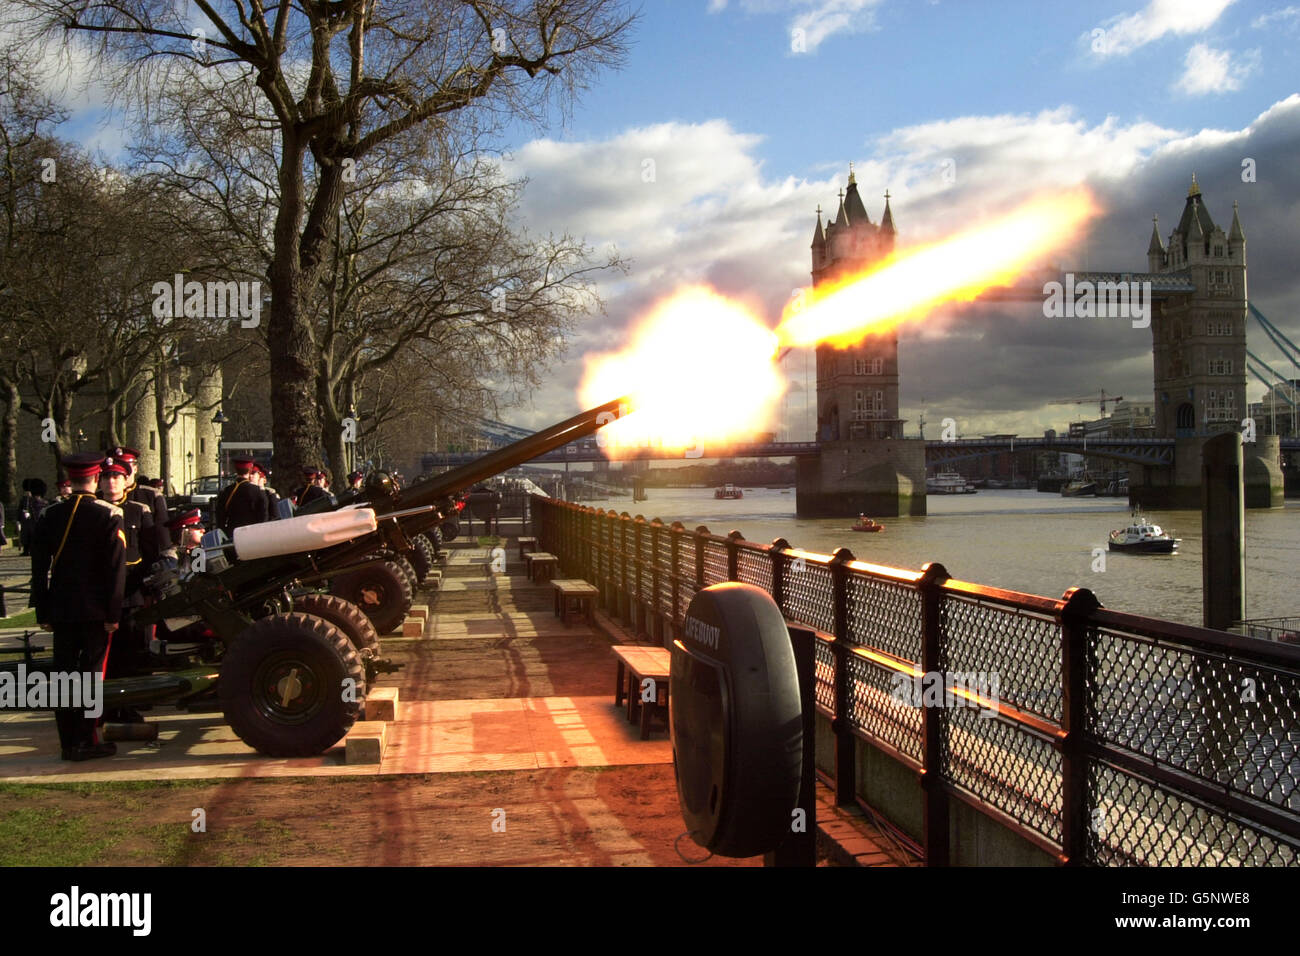 The Honourable Artillery Company mark the 50th anniversary of the Queen's accession to the throne, with a sixty two gun salute at The Tower of London. Stock Photo